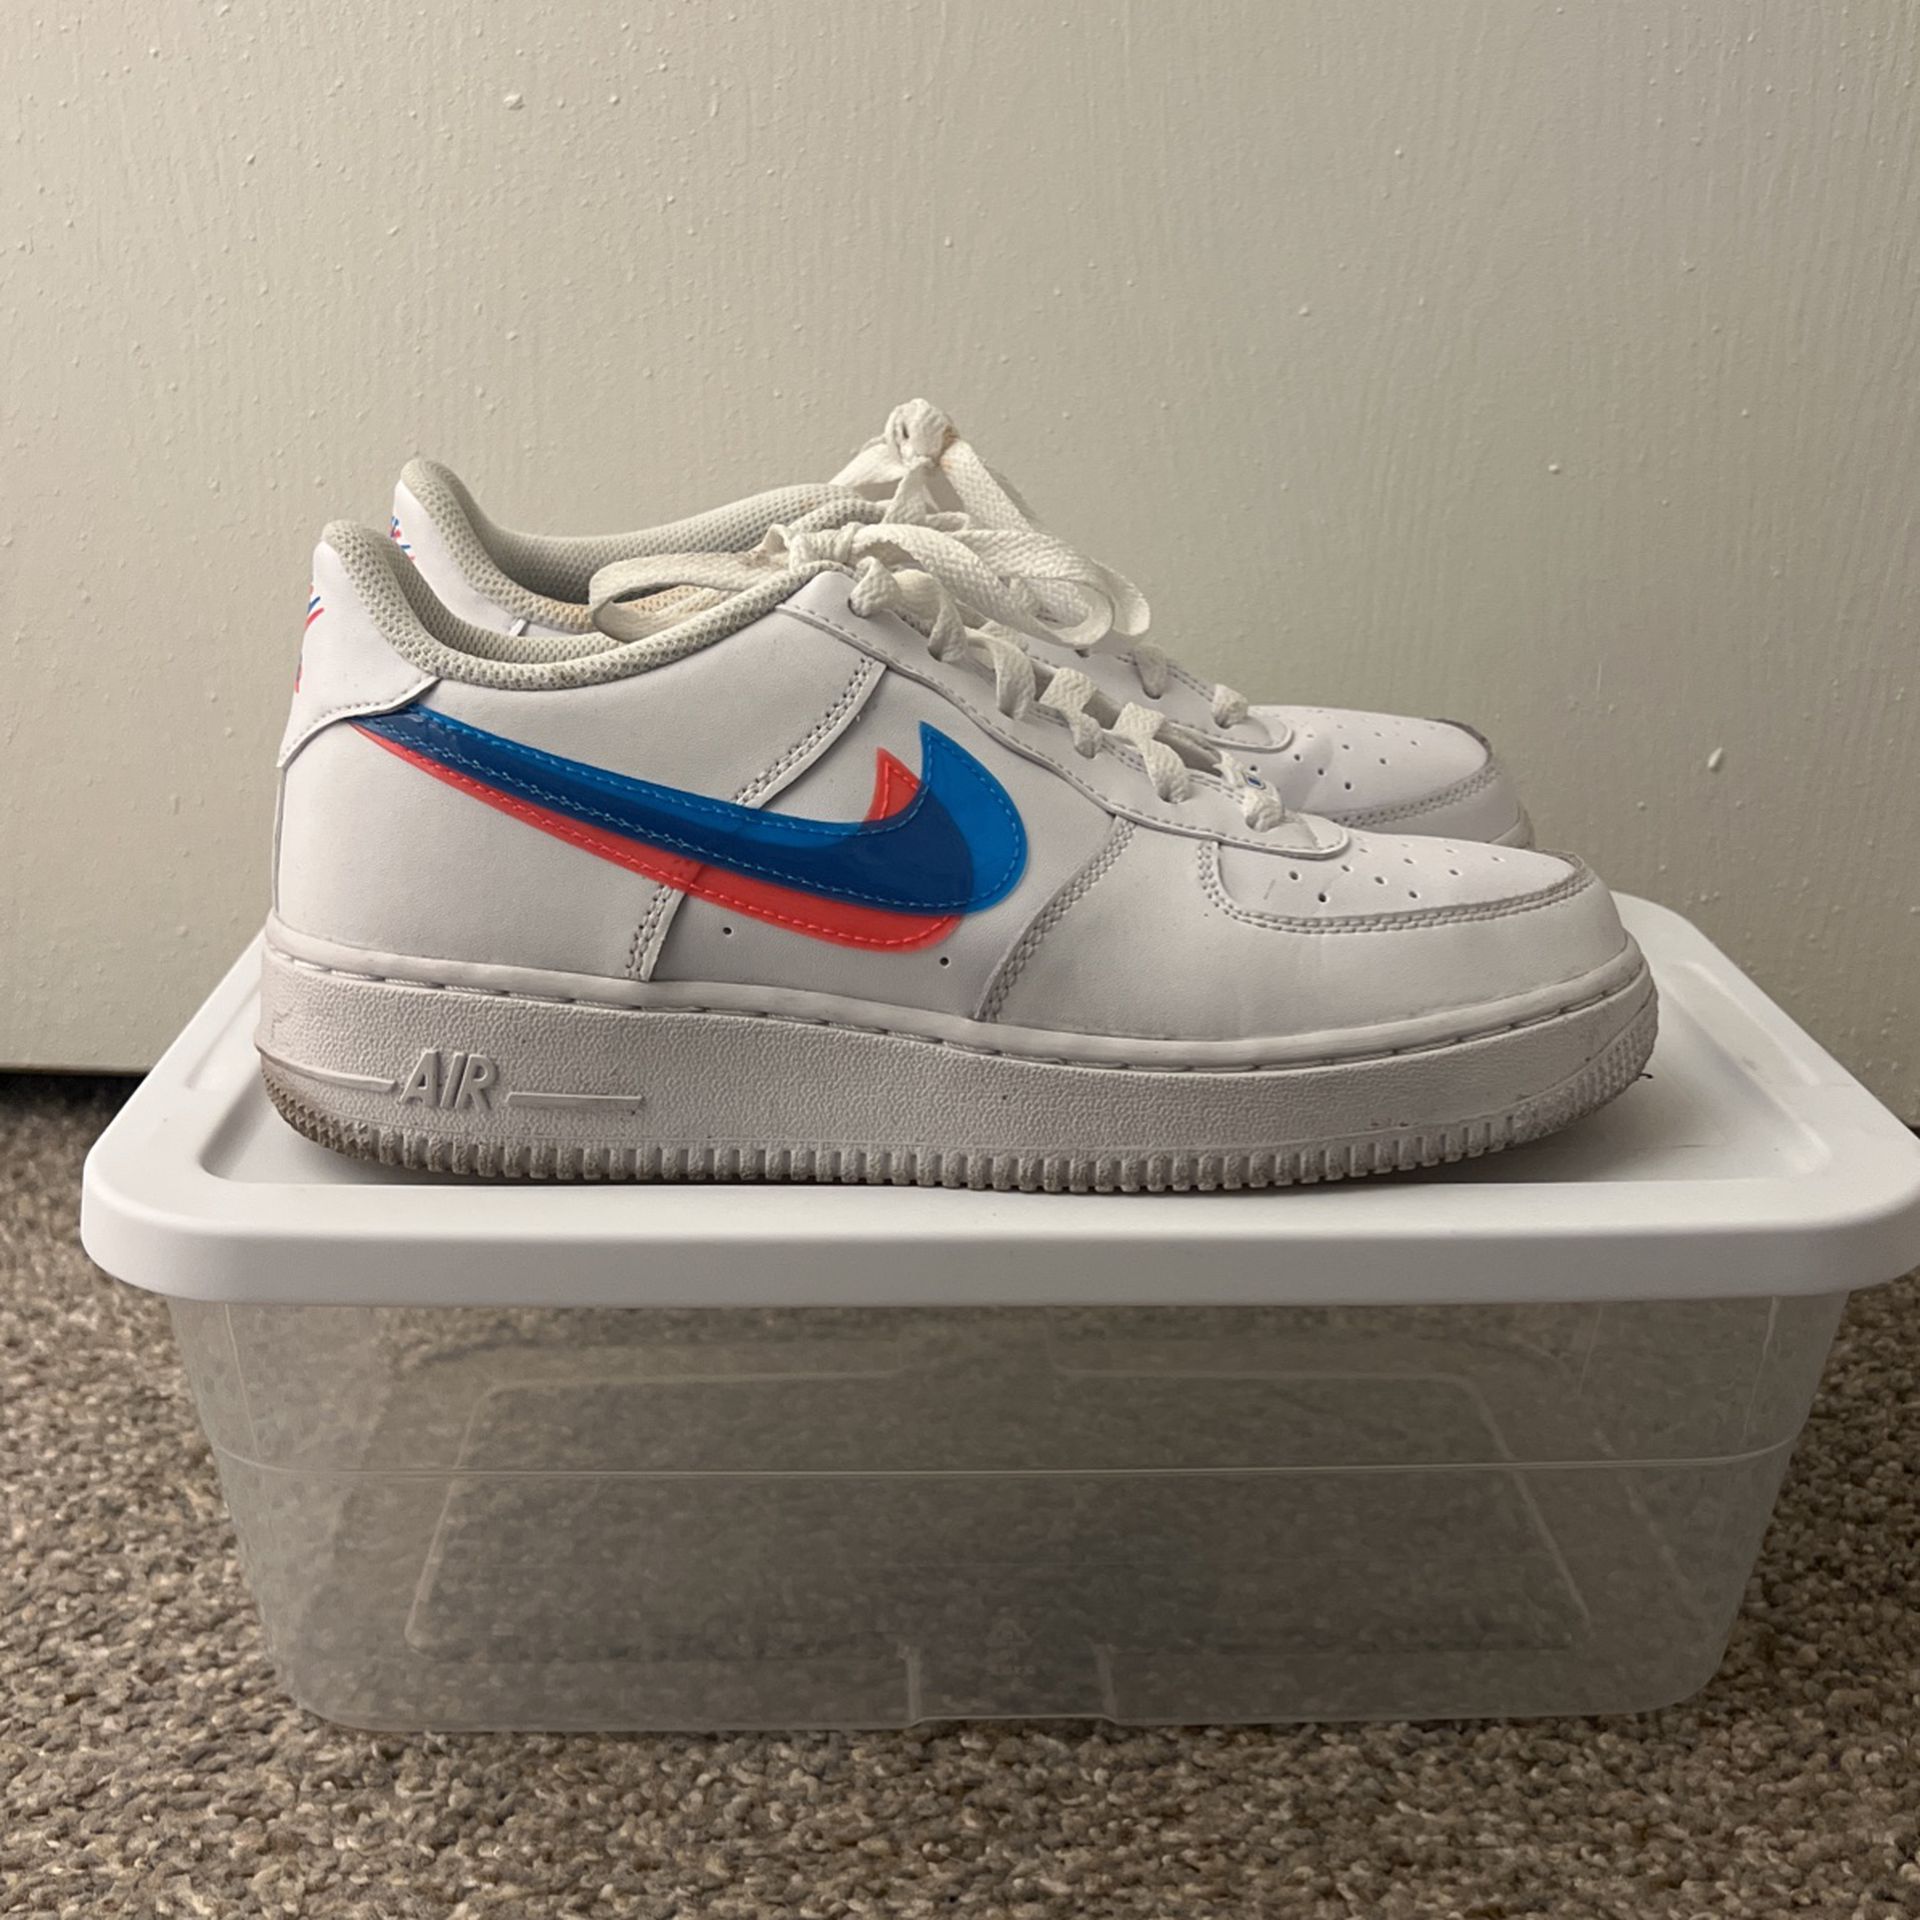 Nike Air Force 1 Glasses” for Sale in Phoenix, AZ - OfferUp